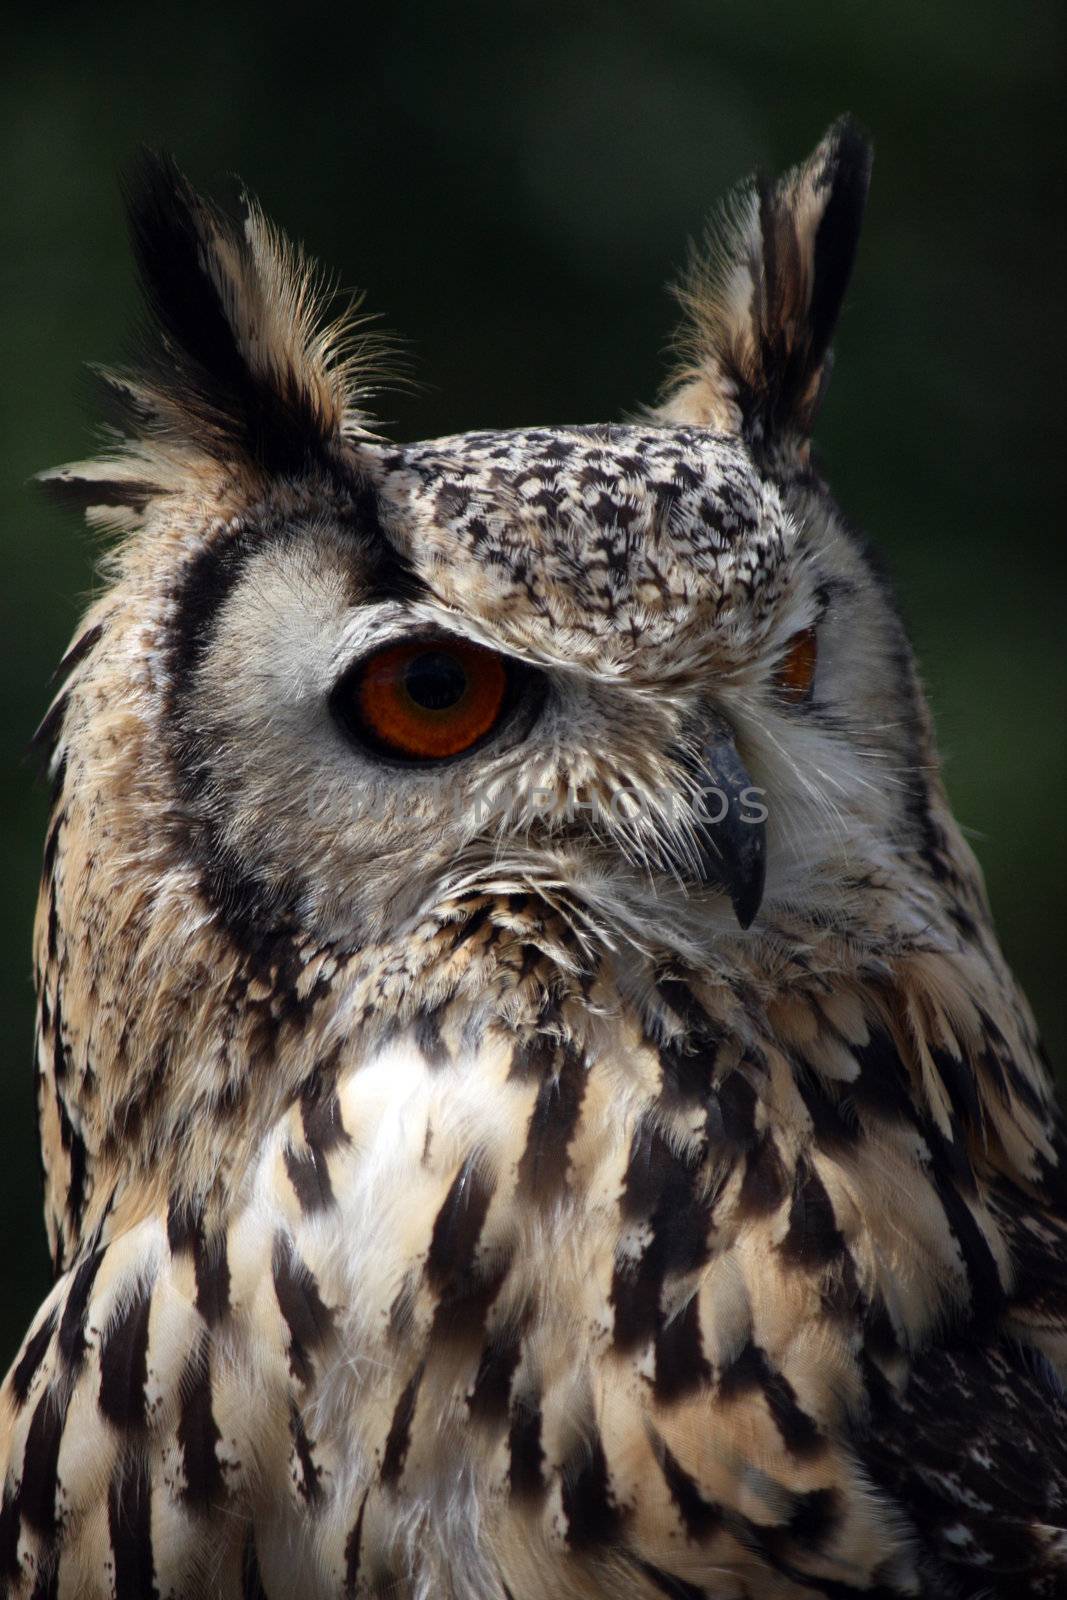 Close up view of the rock eagle-owls head.